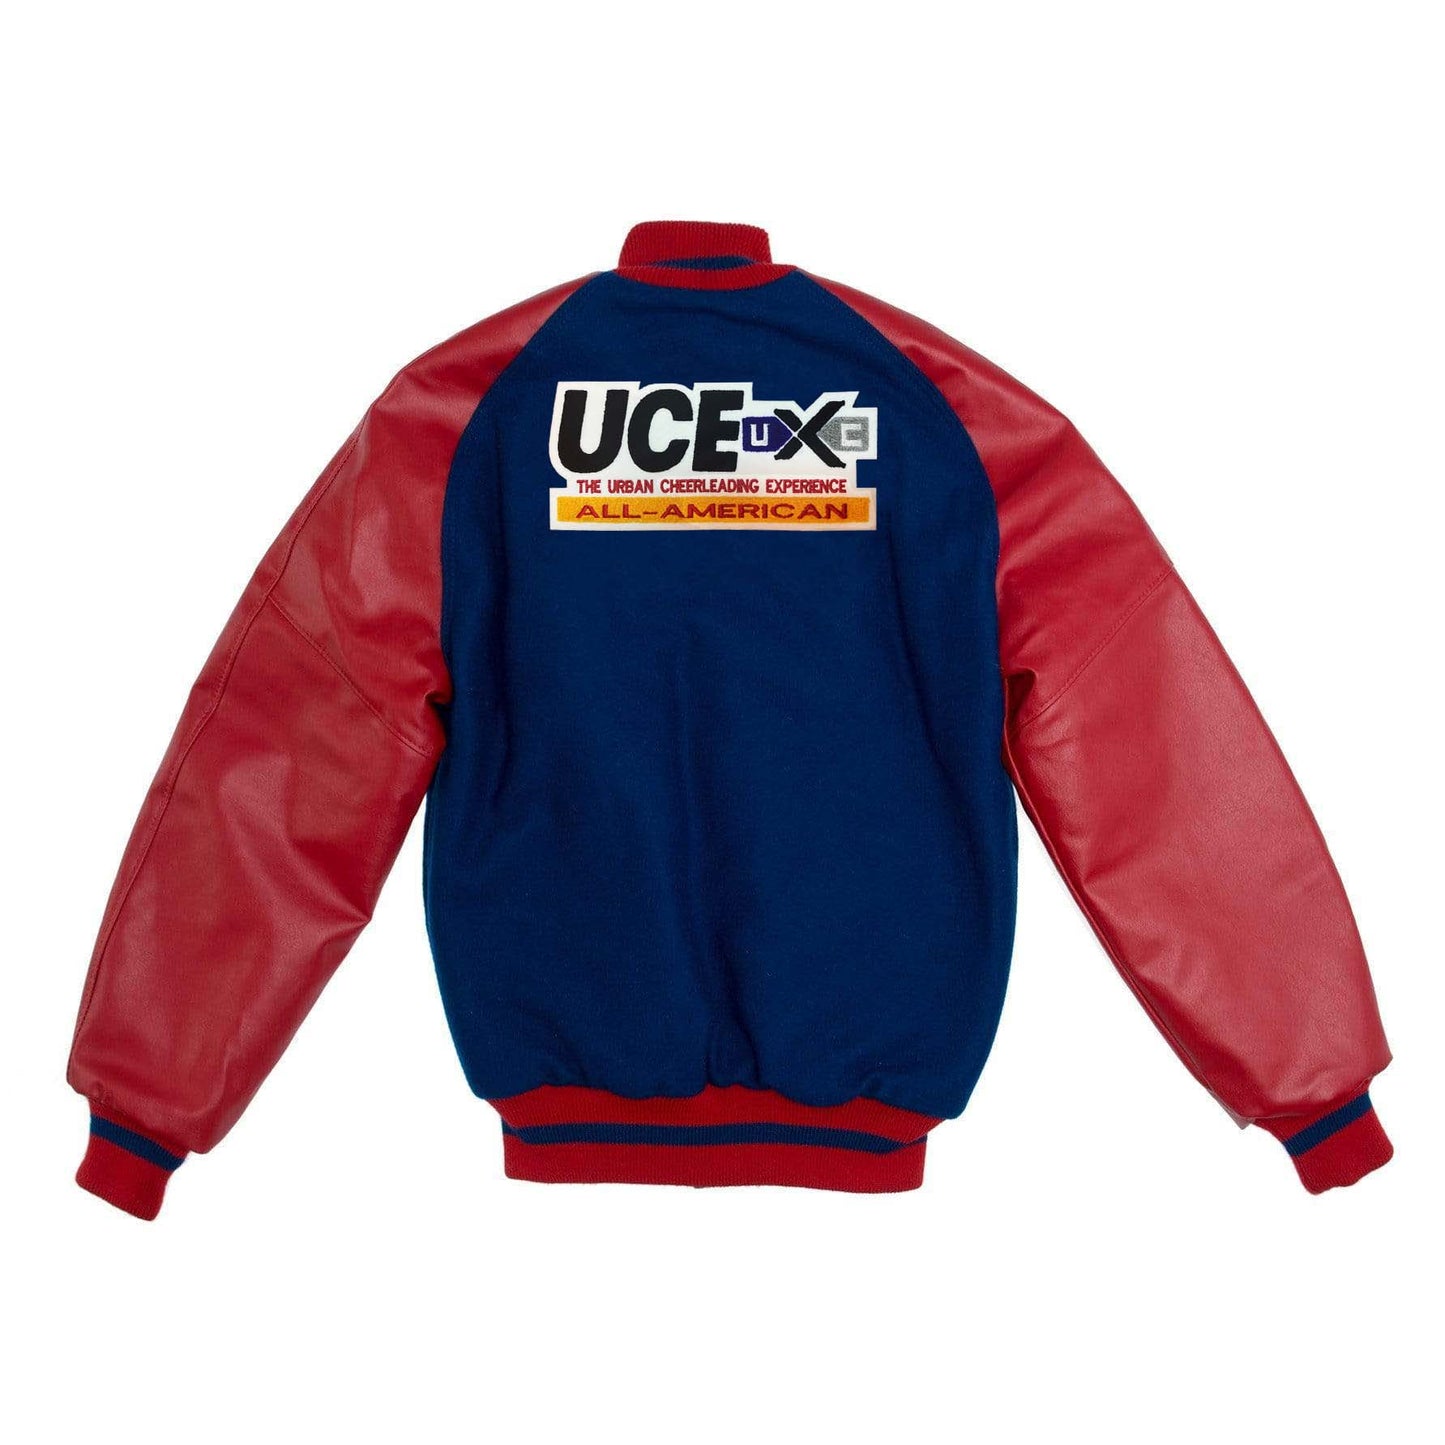 All American Cheer and Dance Collection | Varsity Shop